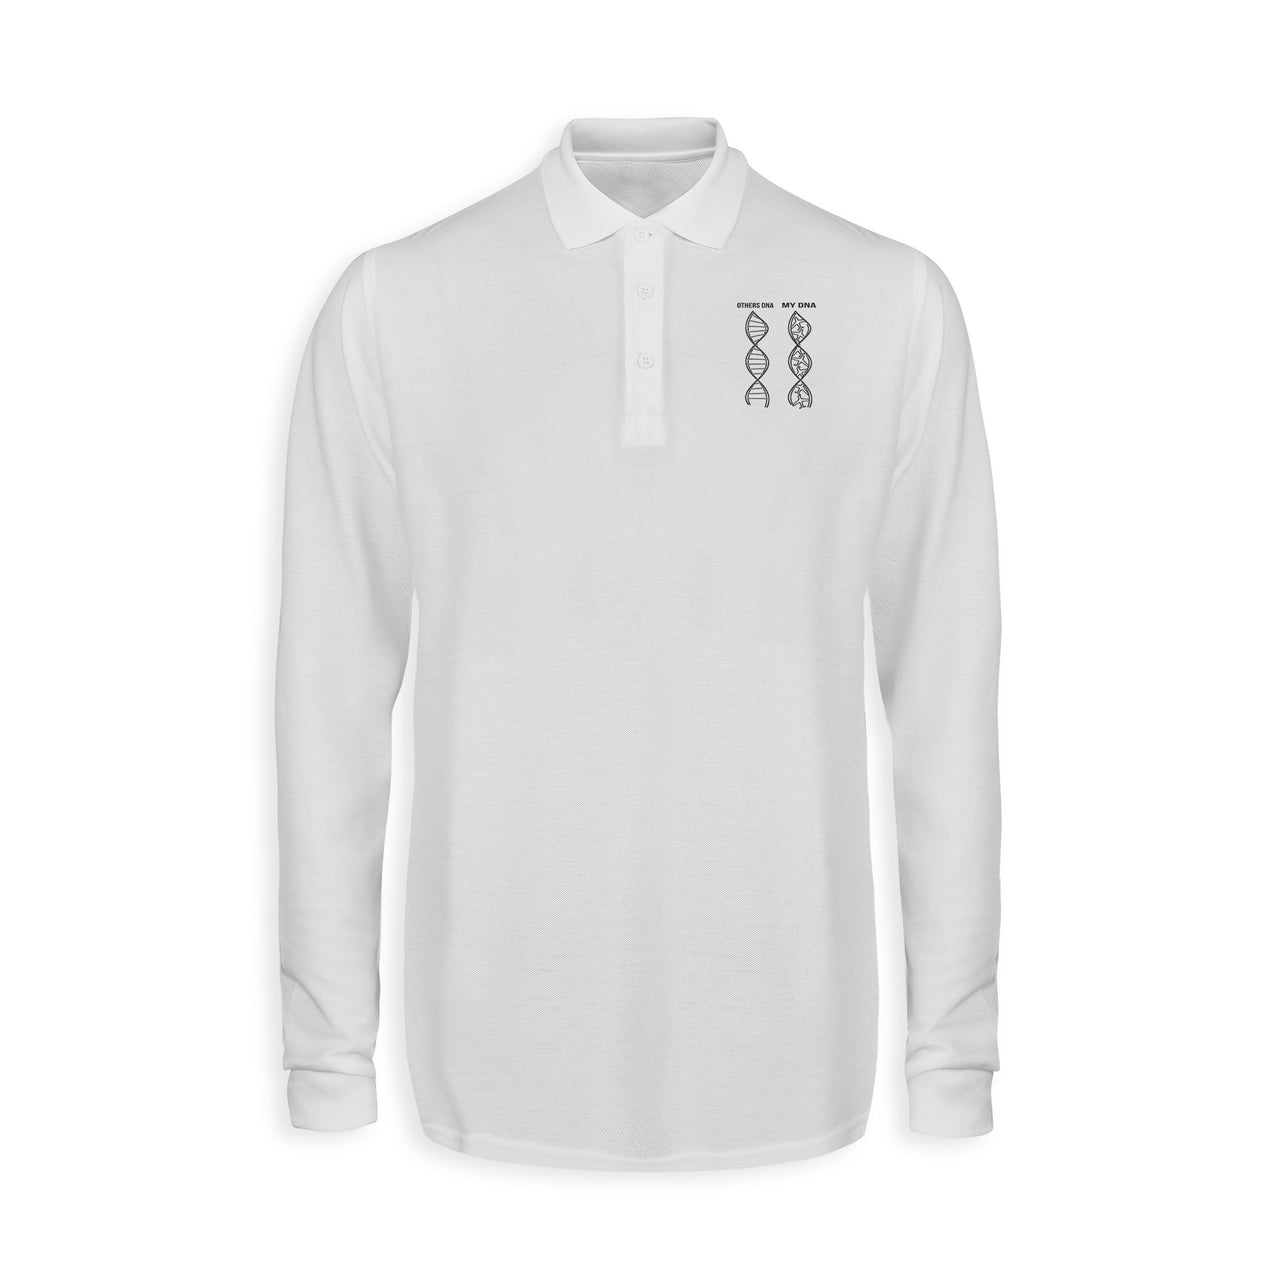 Aviation DNA Designed Long Sleeve Polo T-Shirts